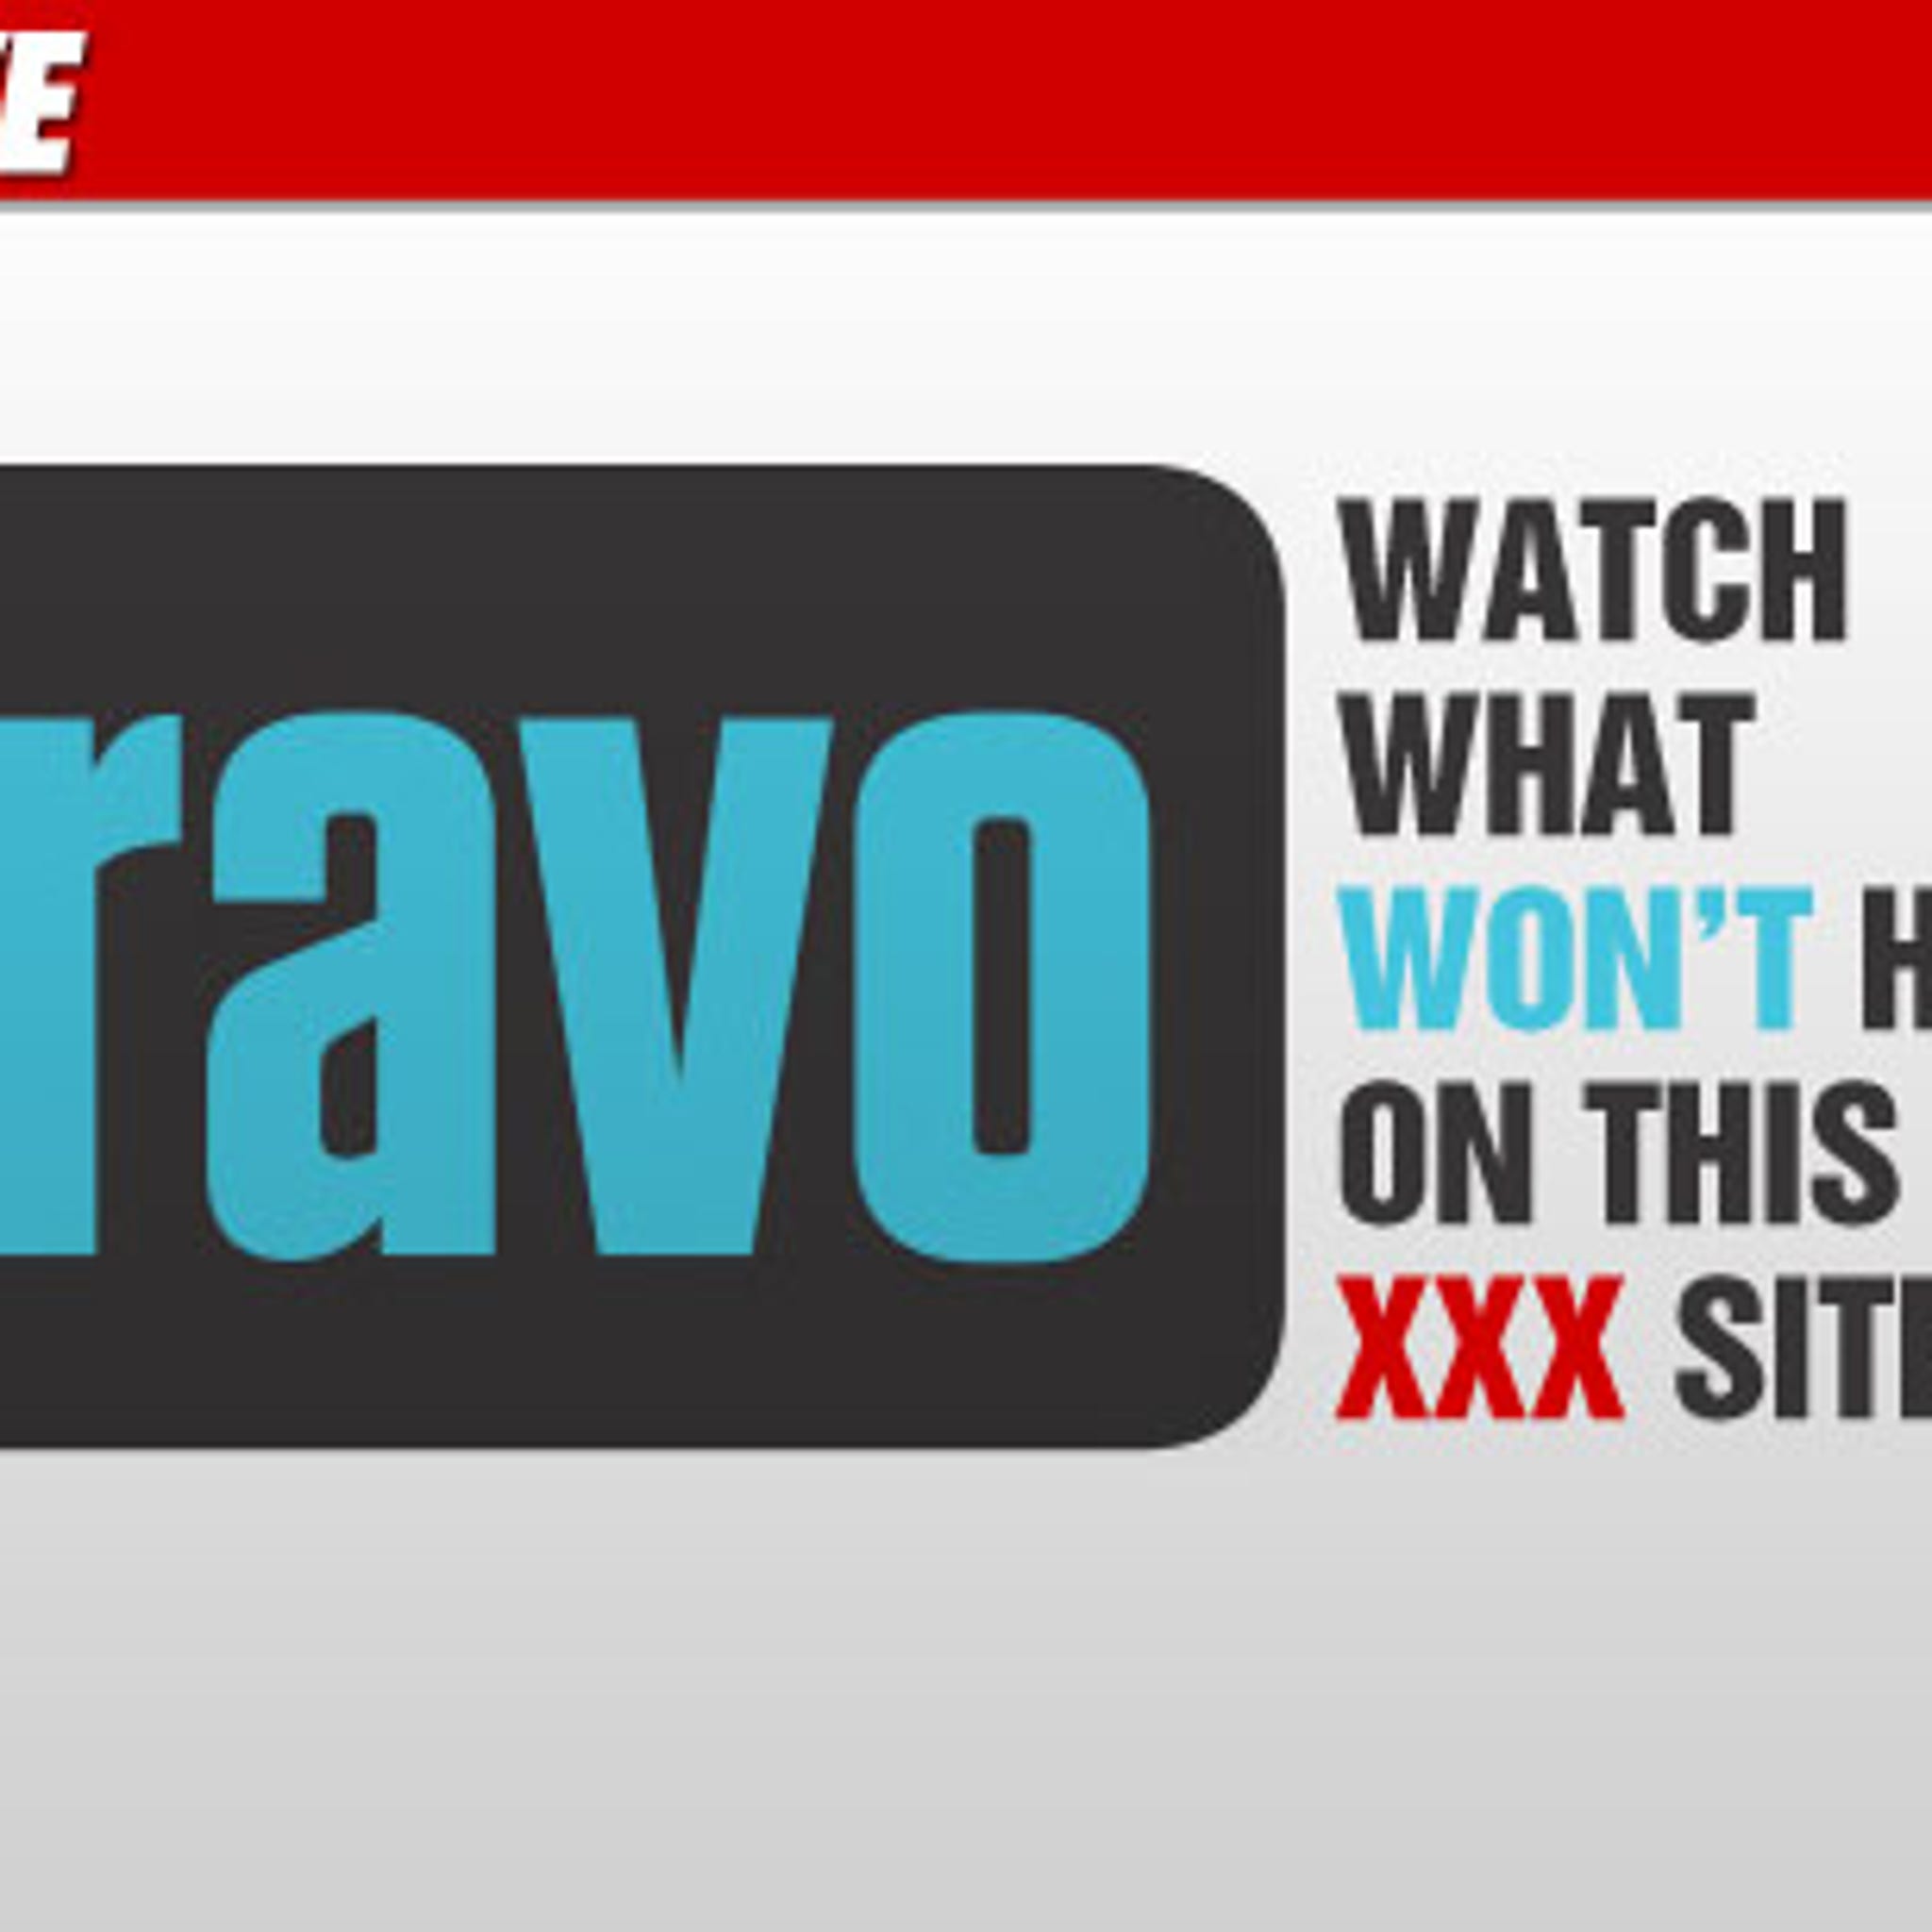 Xxx Rep Sex - Bravo to Porn Site -- Stop Pimping 'Real Housewives'!!!